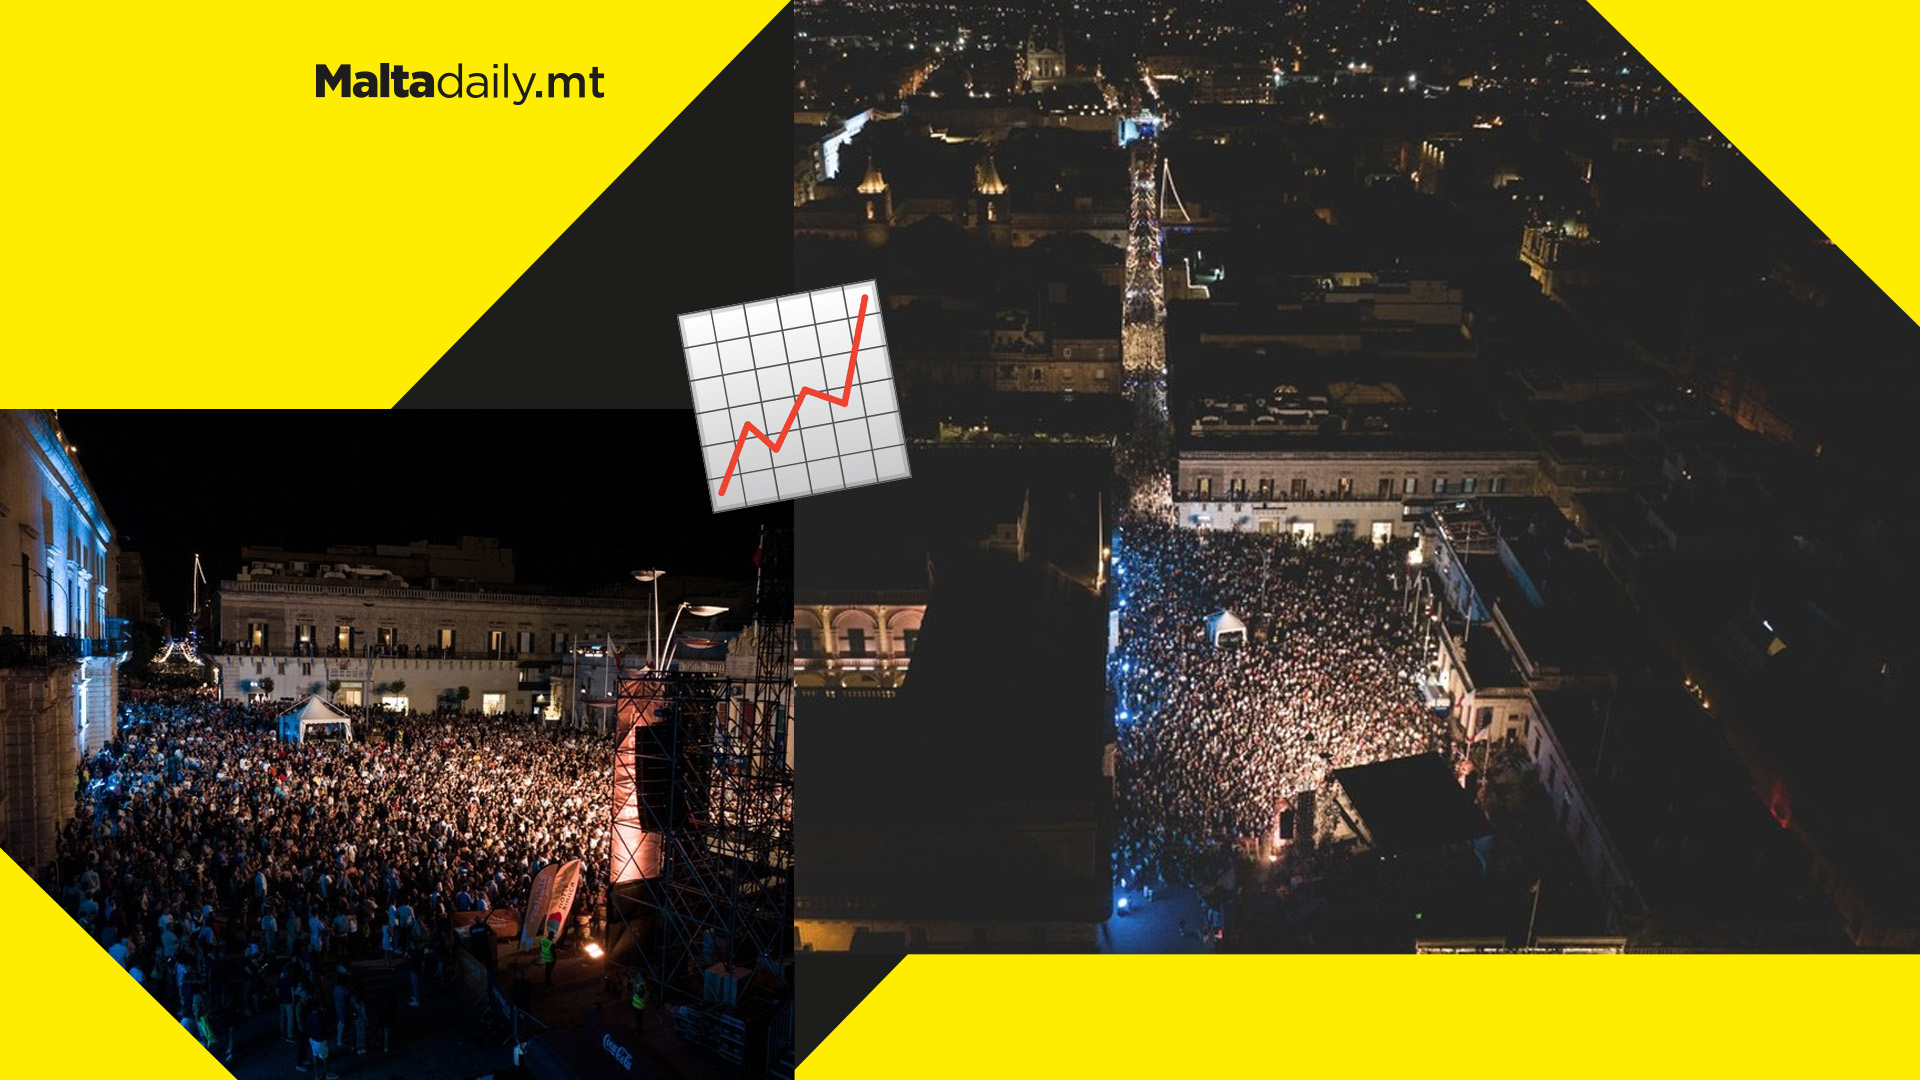 Notte Bianca welcomes record-breaking crowd of 85,000 people for this year's edition